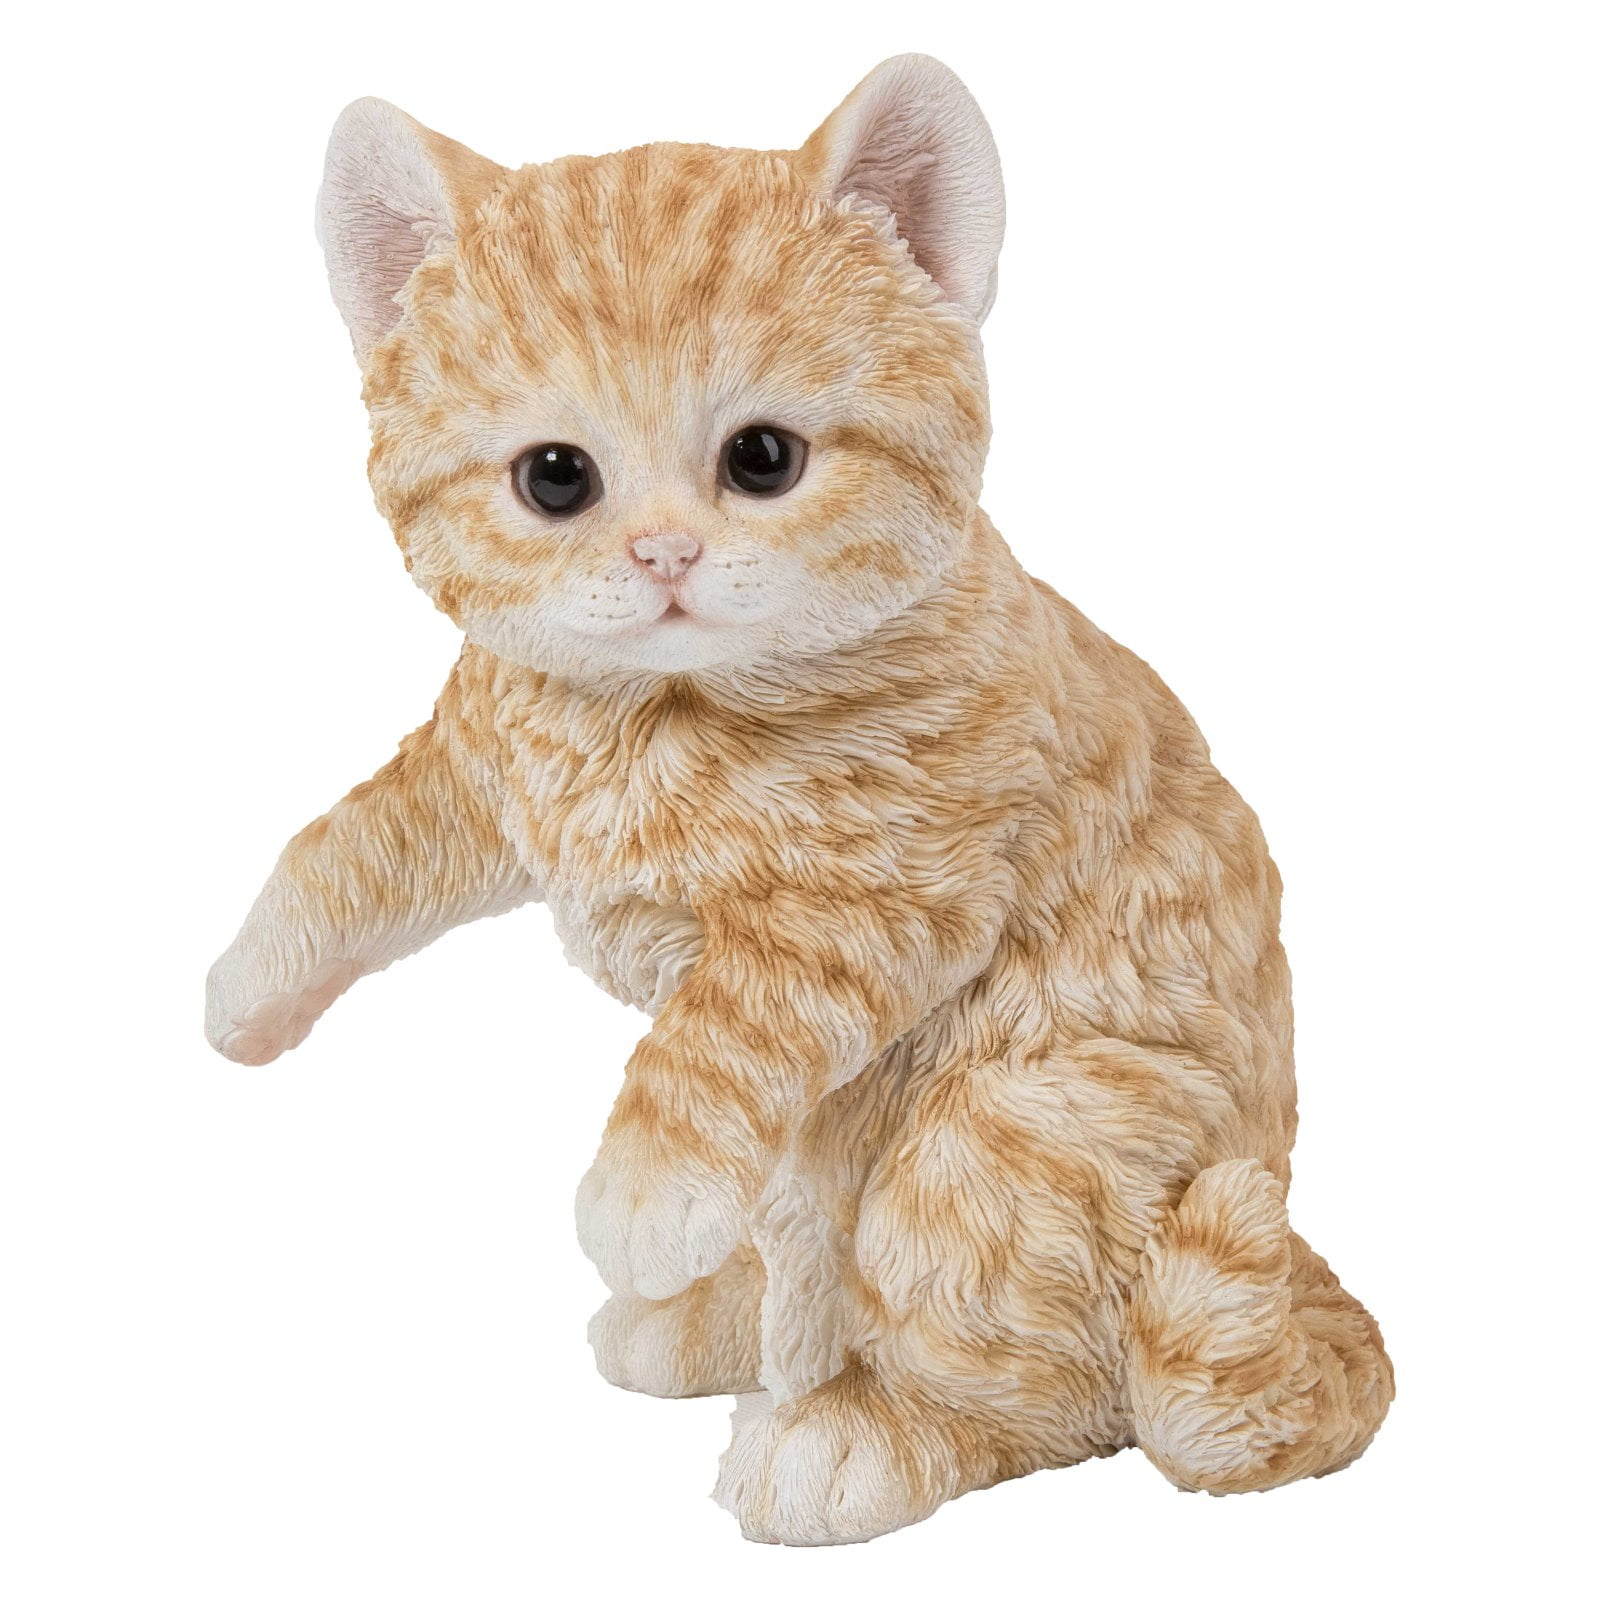 Orange Polyresin Affection Cats Ornament Animal Figurine Decoration Collection 